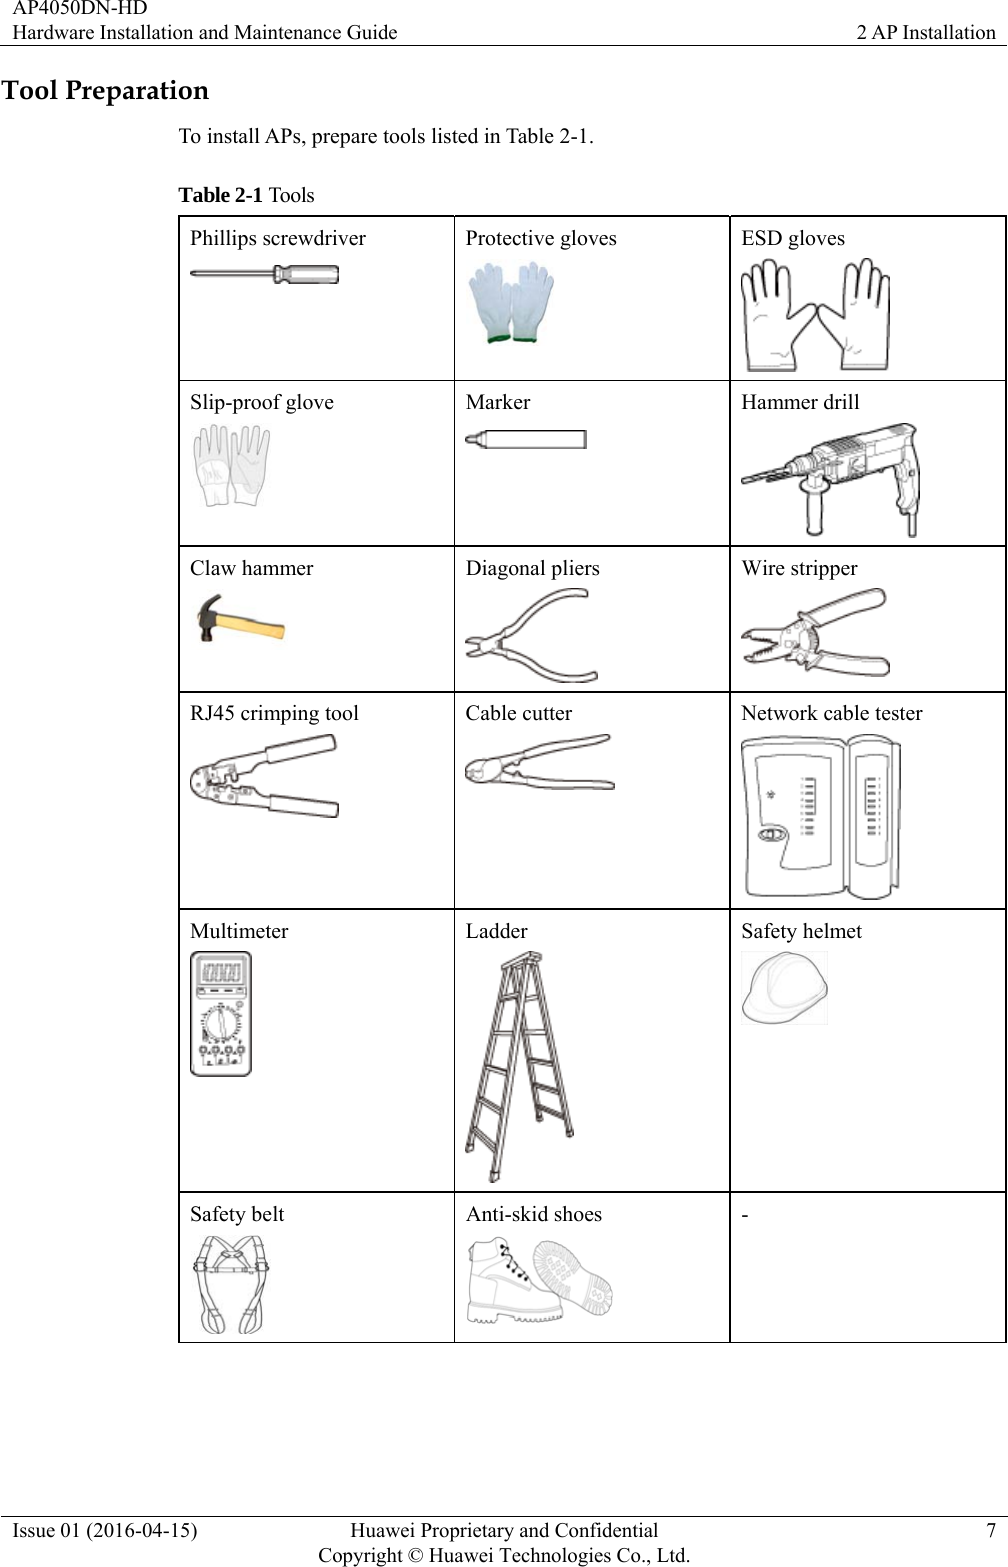 AP4050DN-HD Hardware Installation and Maintenance Guide  2 AP Installation Issue 01 (2016-04-15)  Huawei Proprietary and Confidential         Copyright © Huawei Technologies Co., Ltd.7 Tool Preparation To install APs, prepare tools listed in Table 2-1. Table 2-1 Tools Phillips screwdriver  Protective gloves  ESD gloves  Slip-proof glove  Marker  Hammer drill  Claw hammer  Diagonal pliers  Wire stripper  RJ45 crimping tool  Cable cutter  Network cable tester  Multimeter  Ladder  Safety helmet  Safety belt  Anti-skid shoes  -  